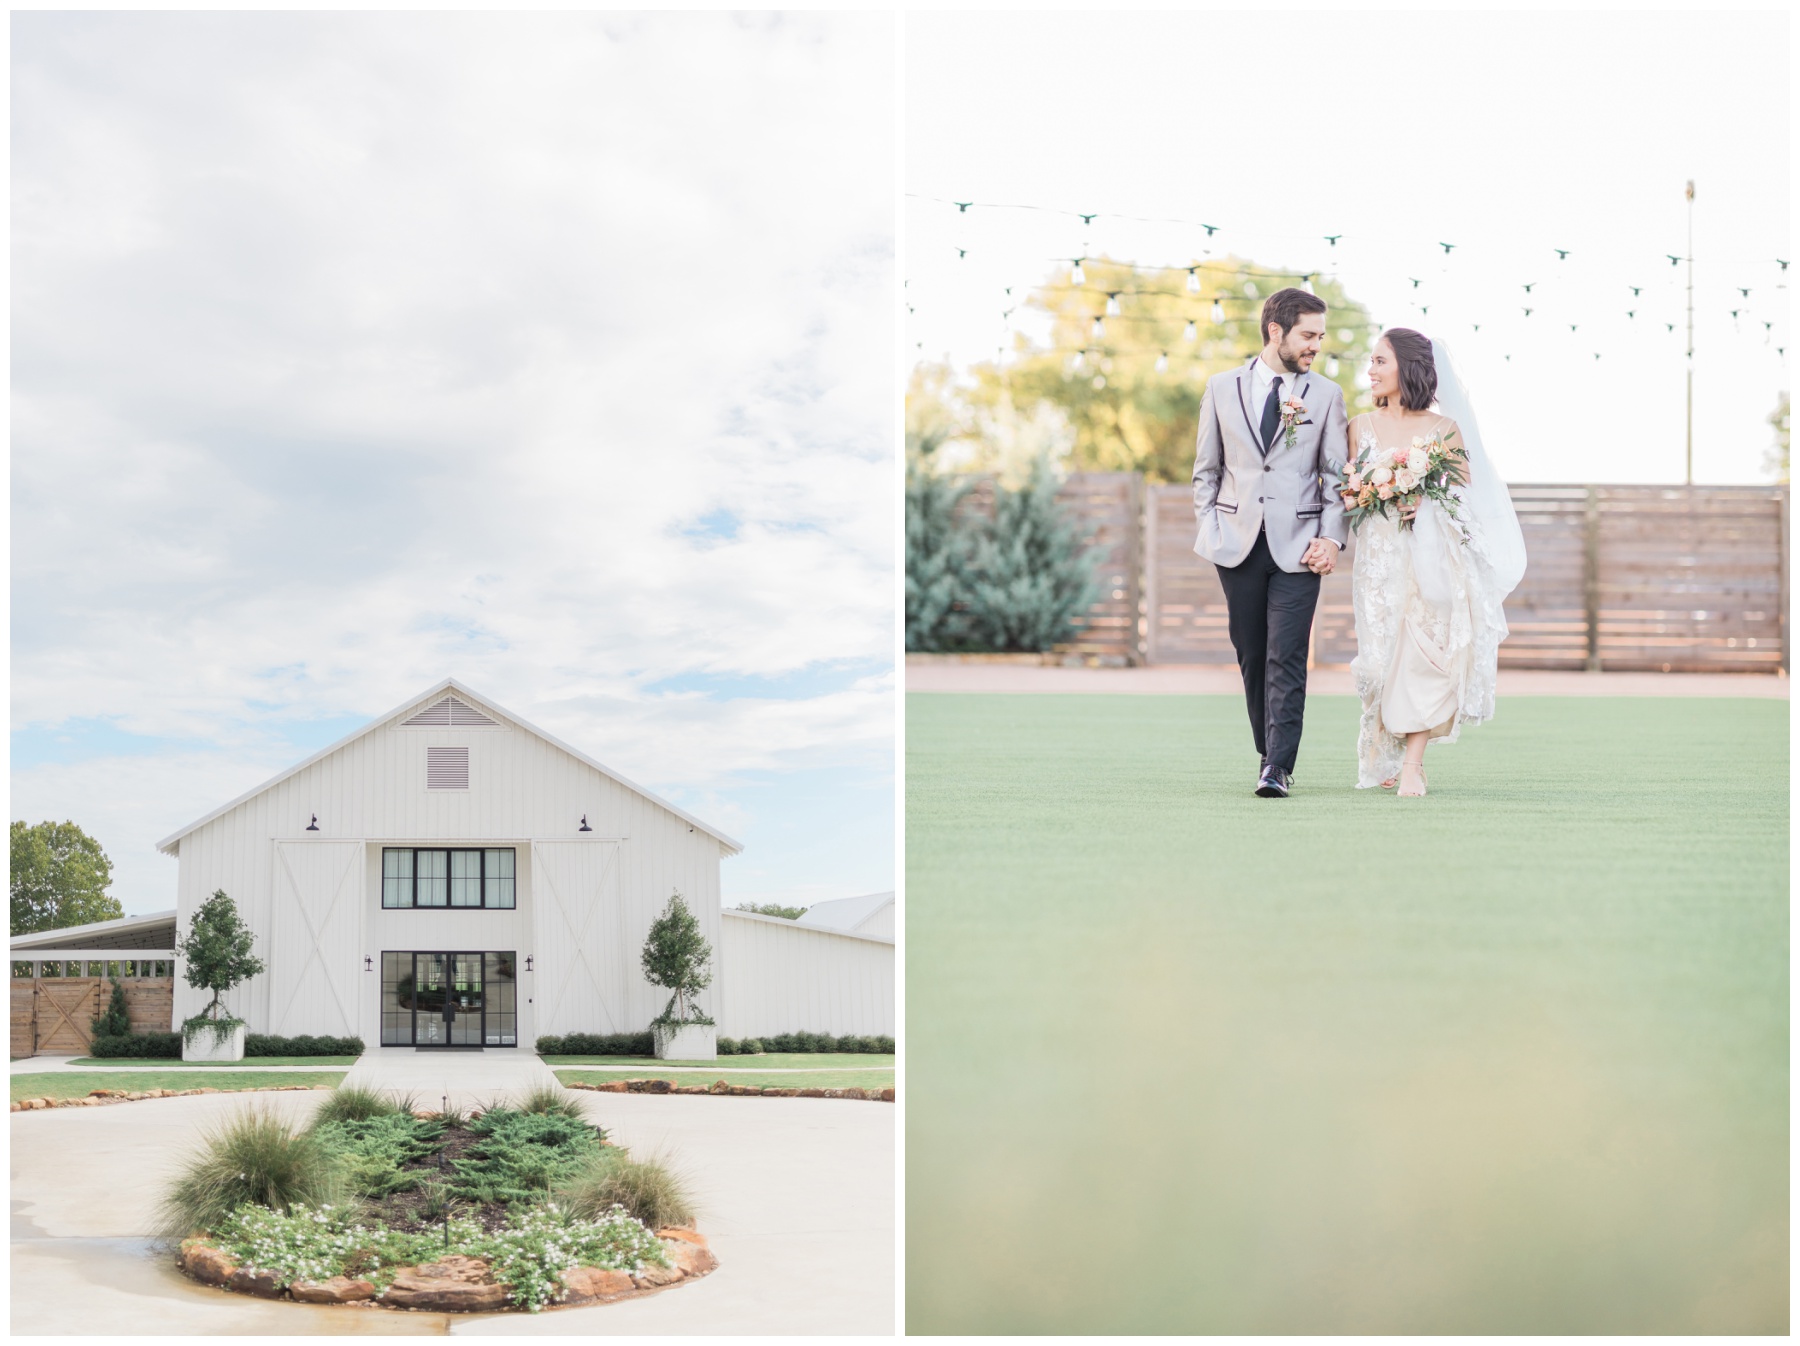 Outdoor ceremony at The Farmhouse in Houston, Texas